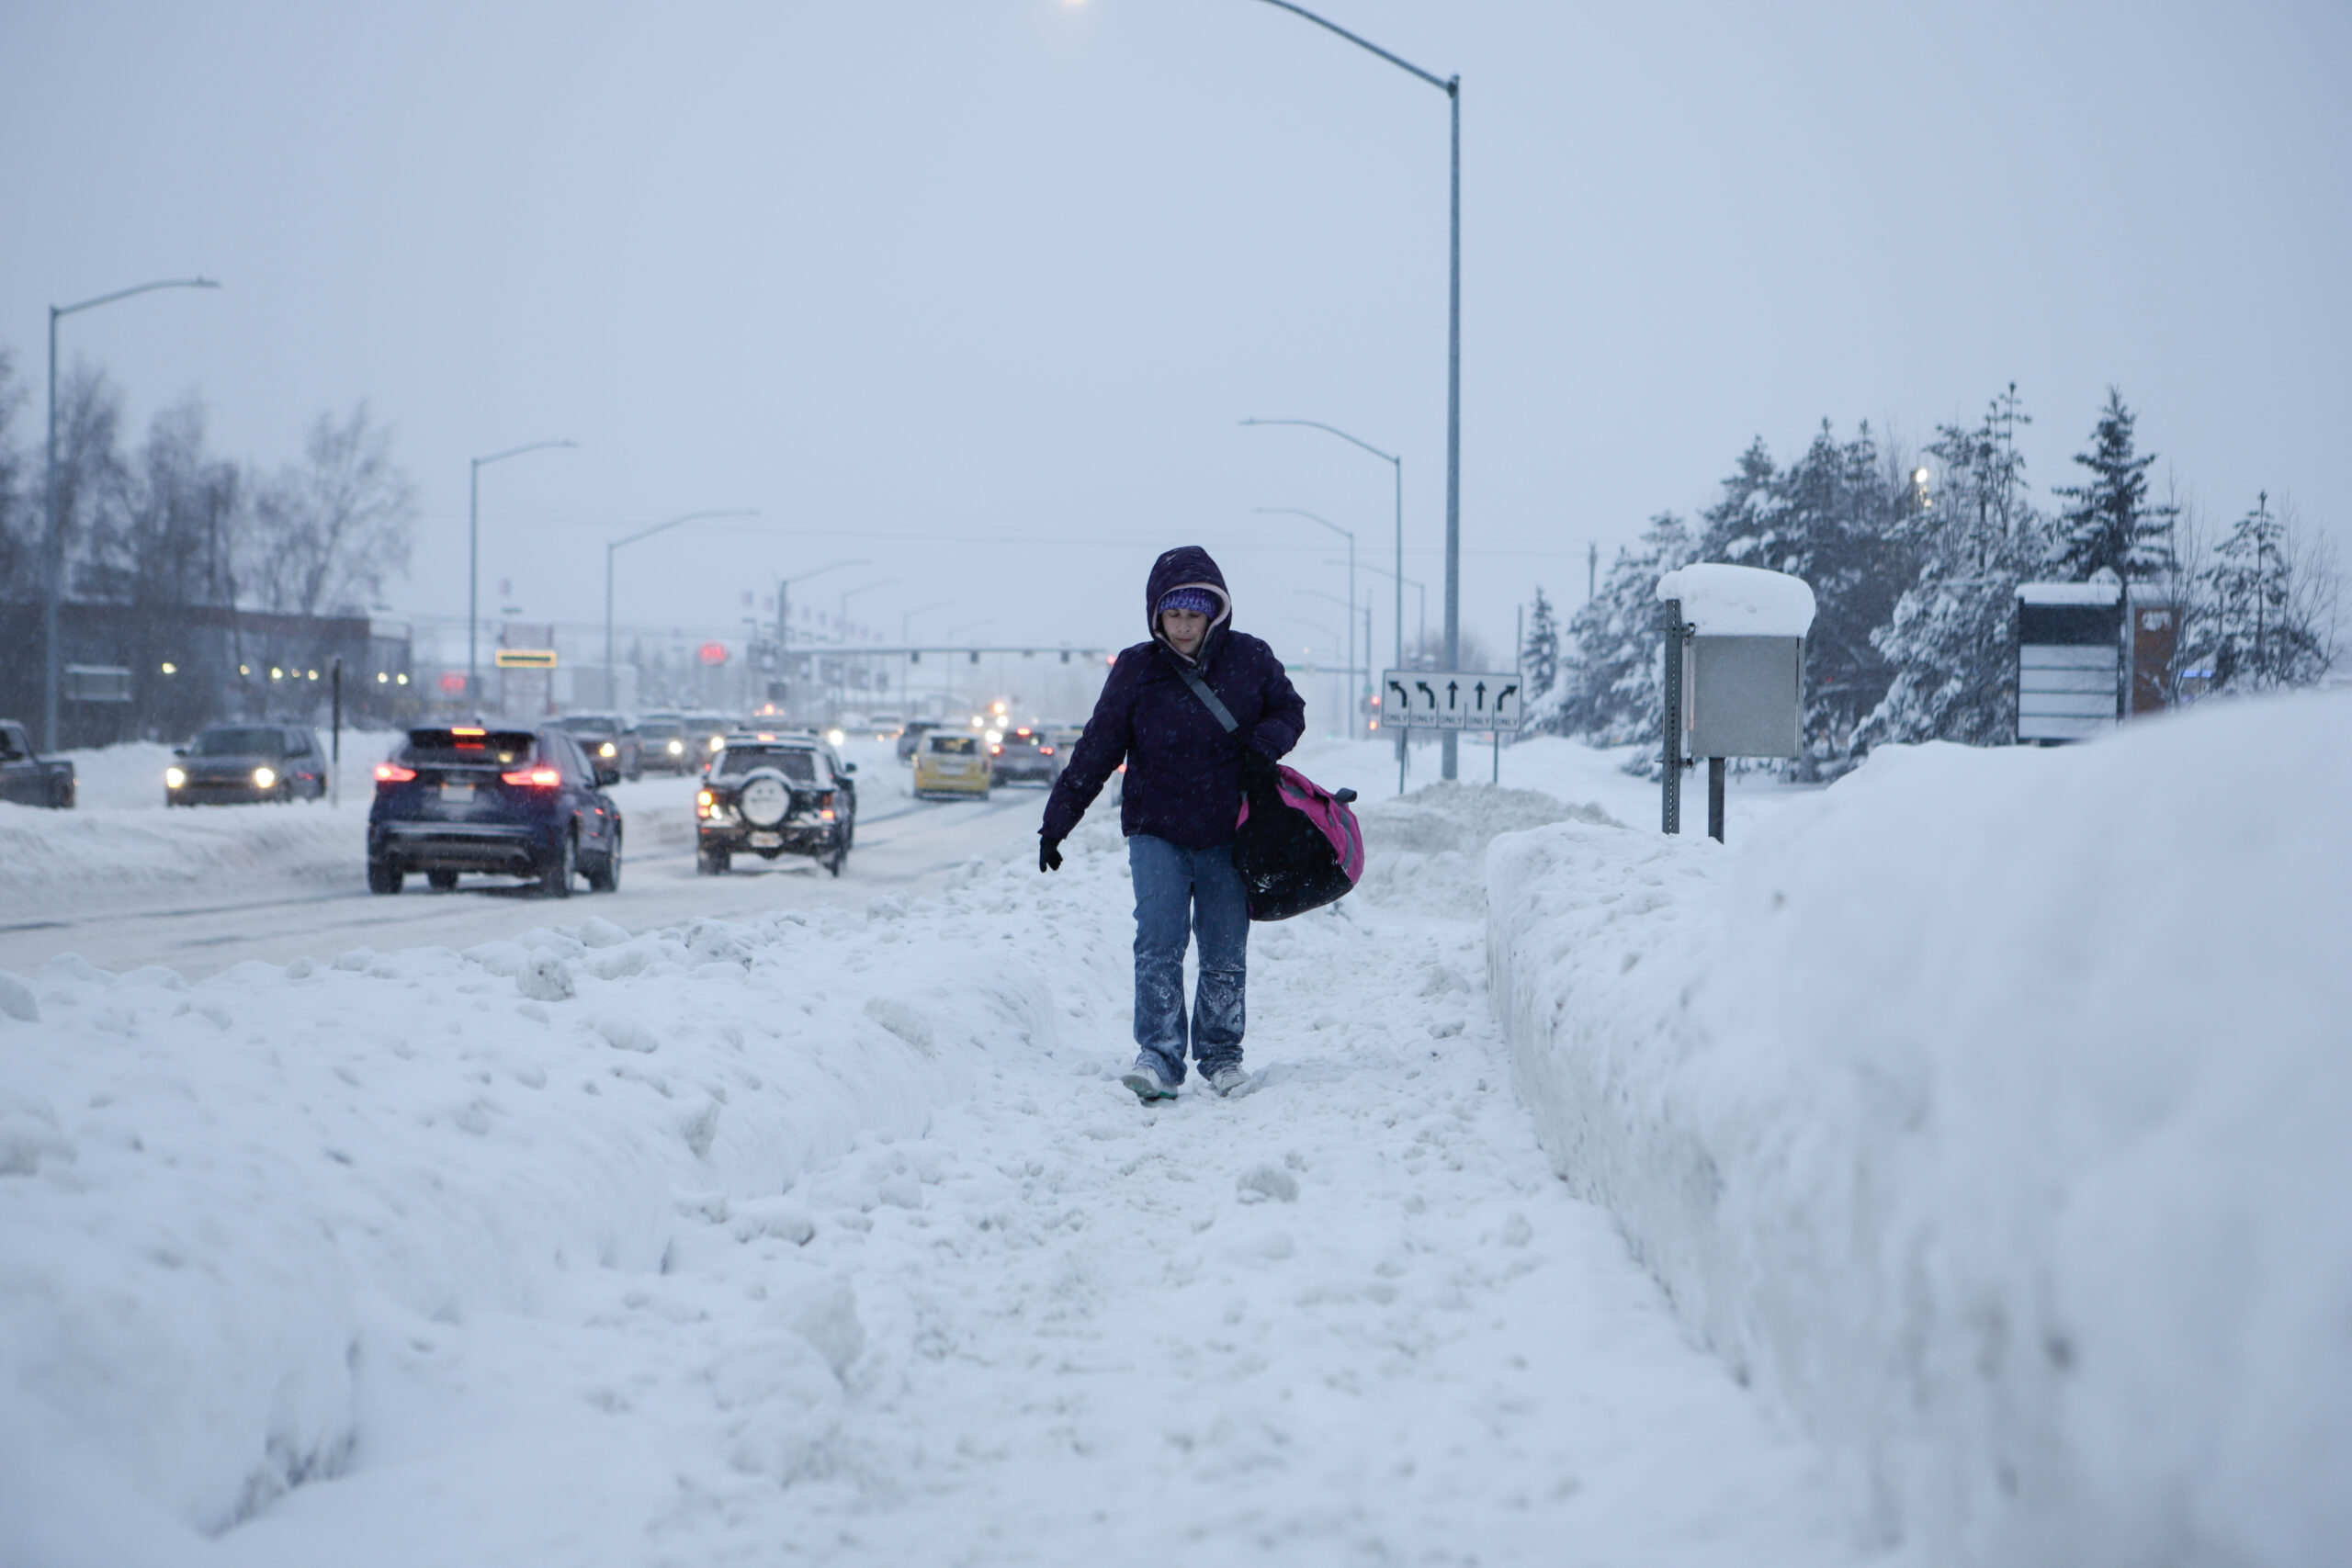 A woman walks on a snowy pathway with heavy traffic.